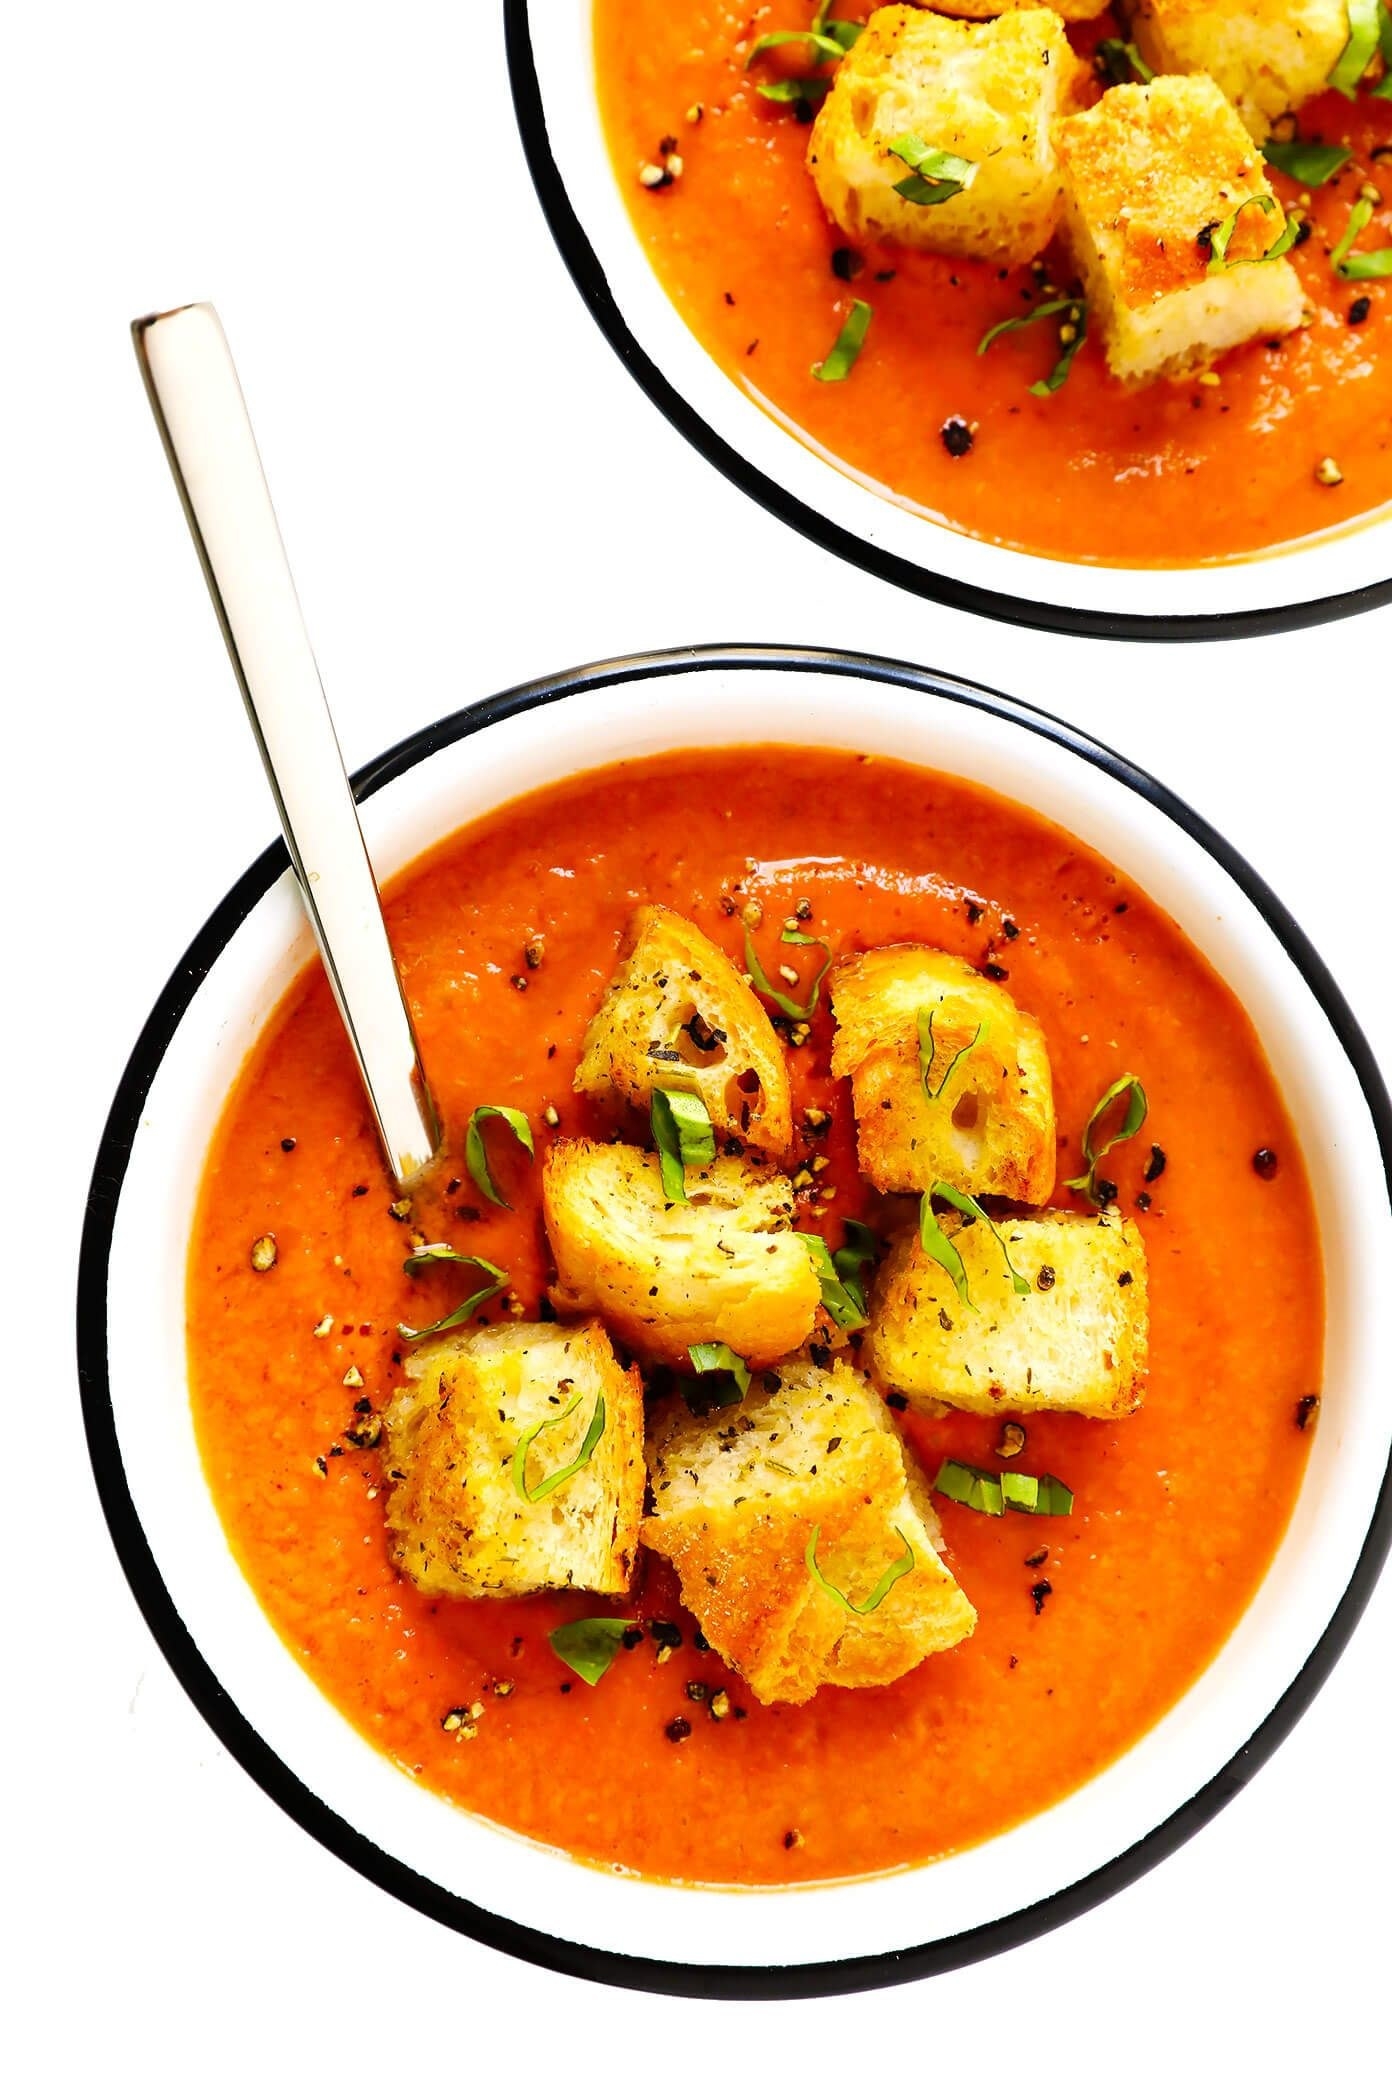 Bowls of gazpacho with croutons